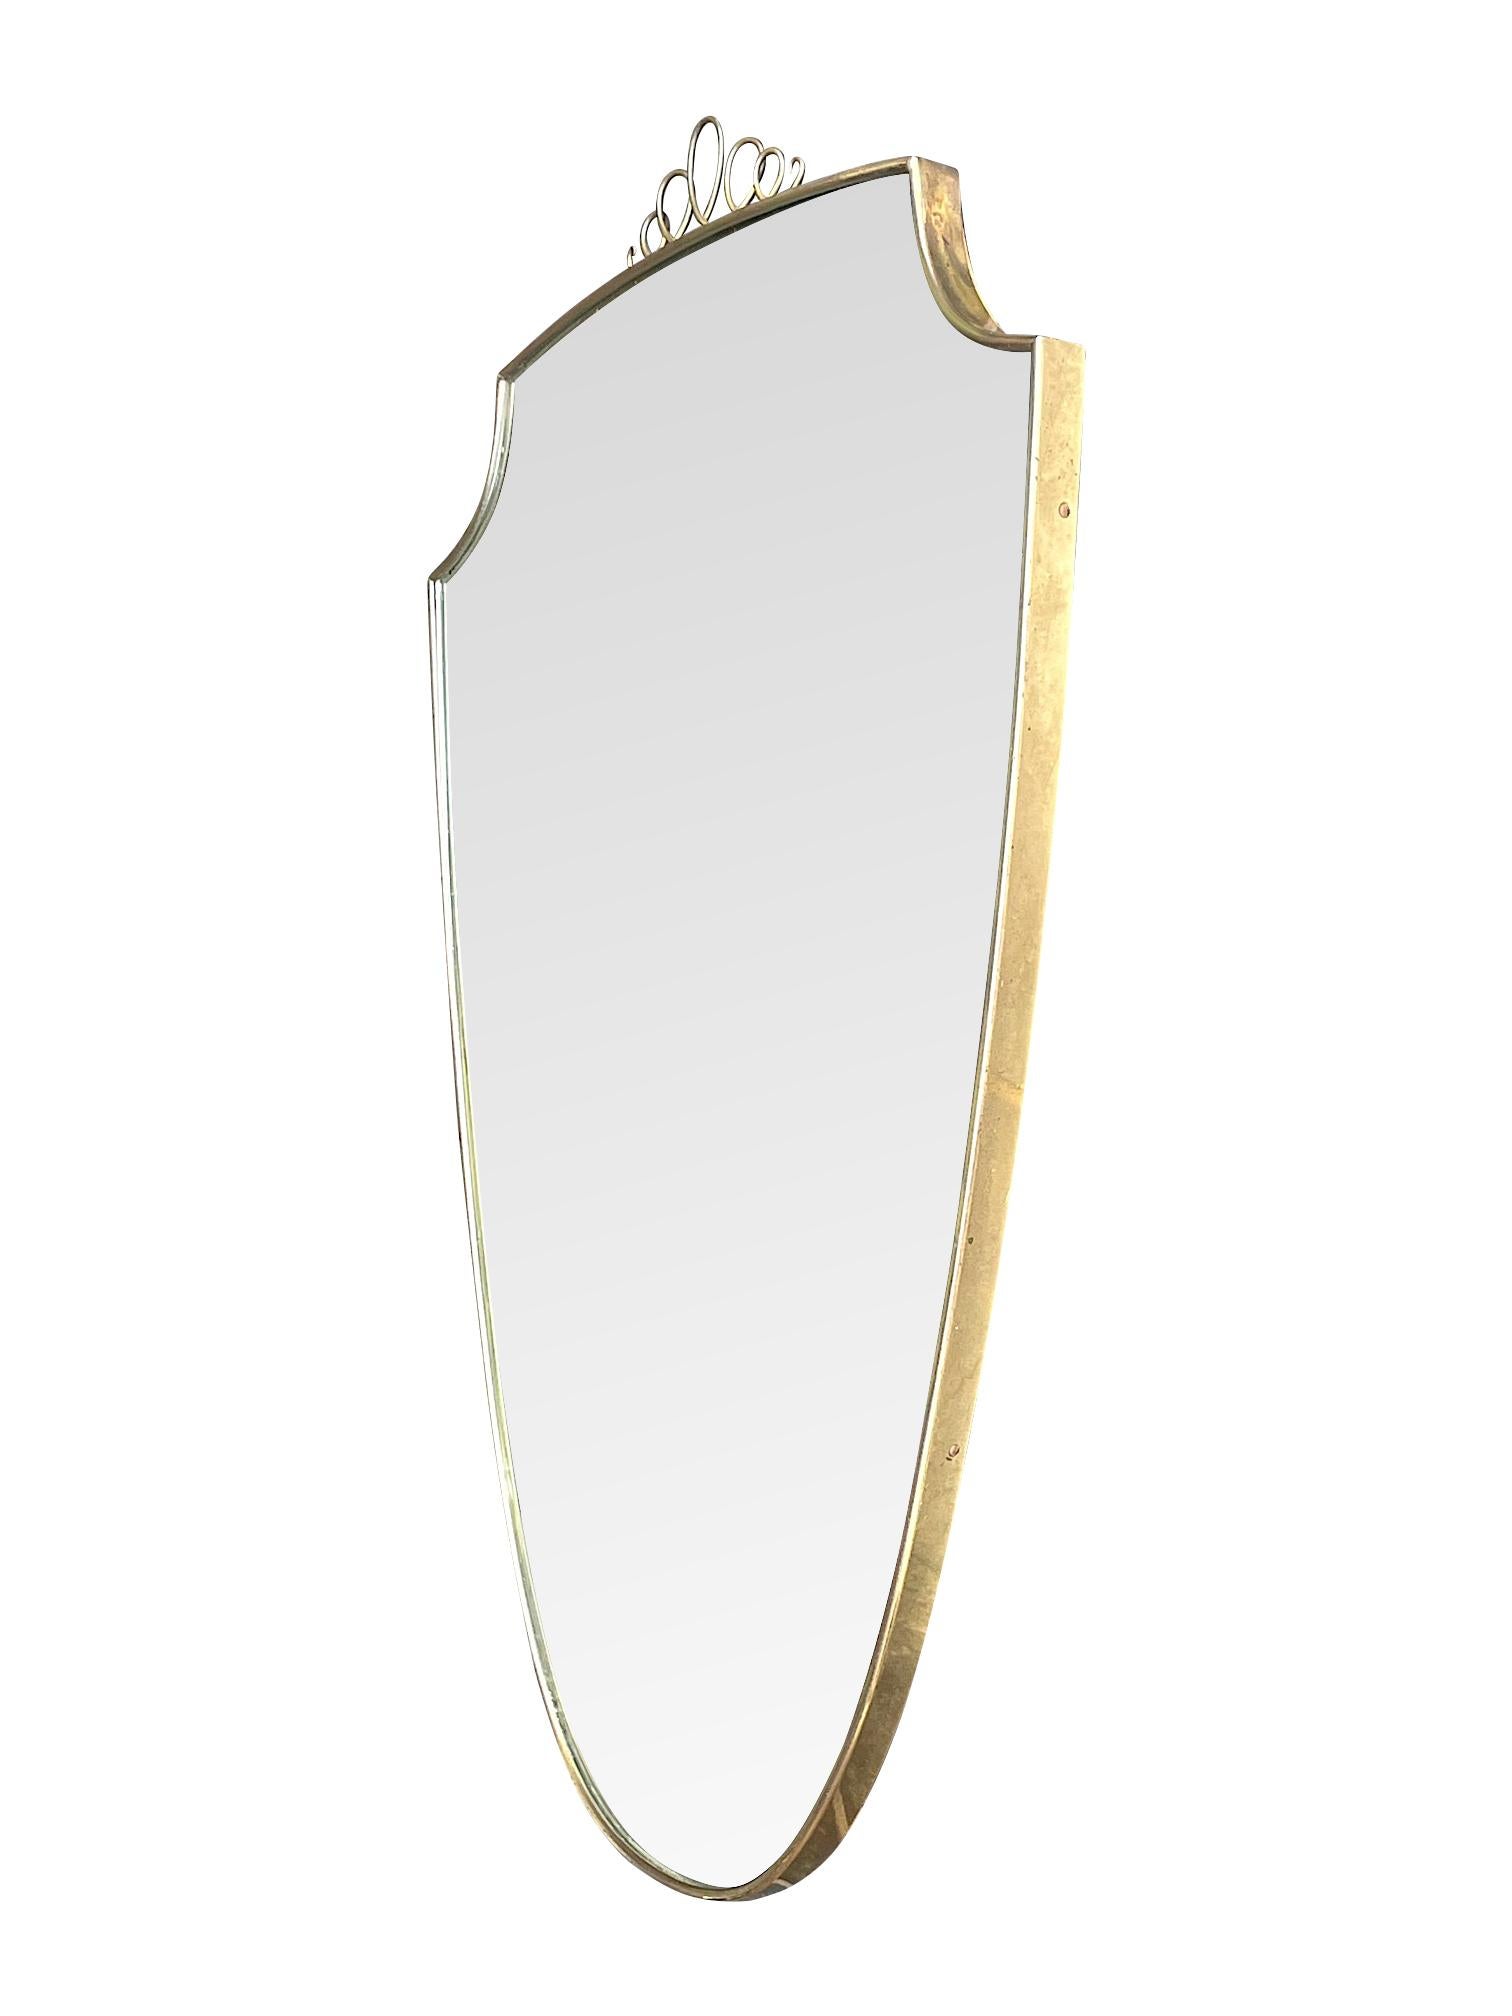 Original 1950s Italian Brass Shield Mirror with Central Decorative Top Detail 2